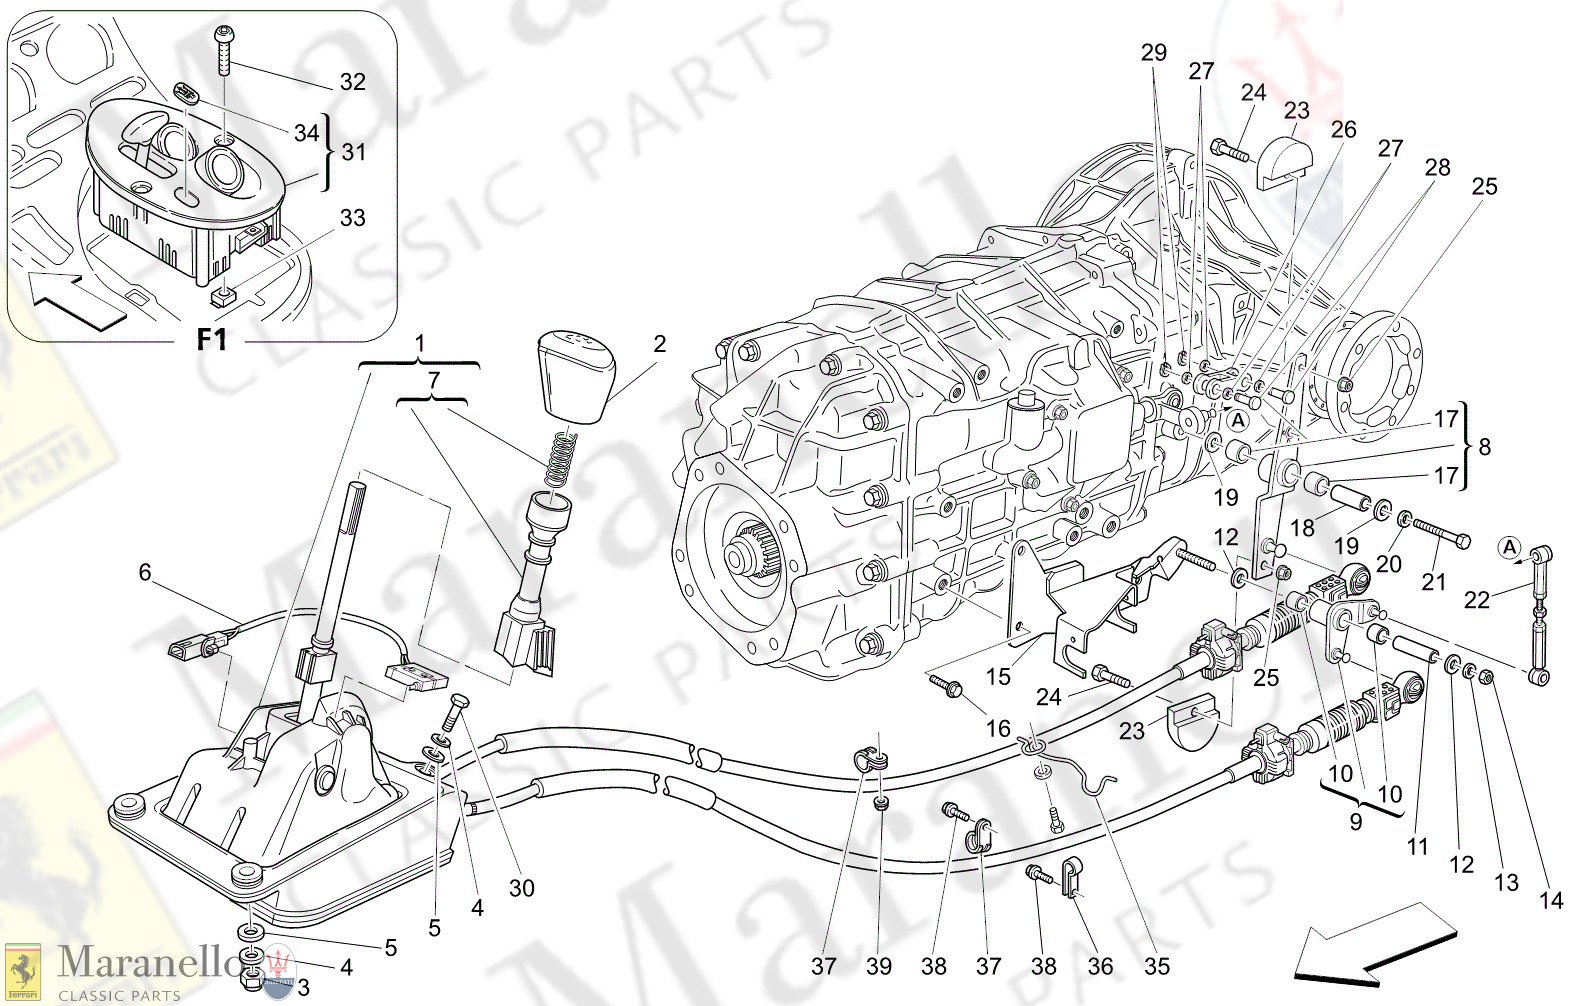 M3.03 - 11 - M303 - 11 Driver Controls For Gearbox